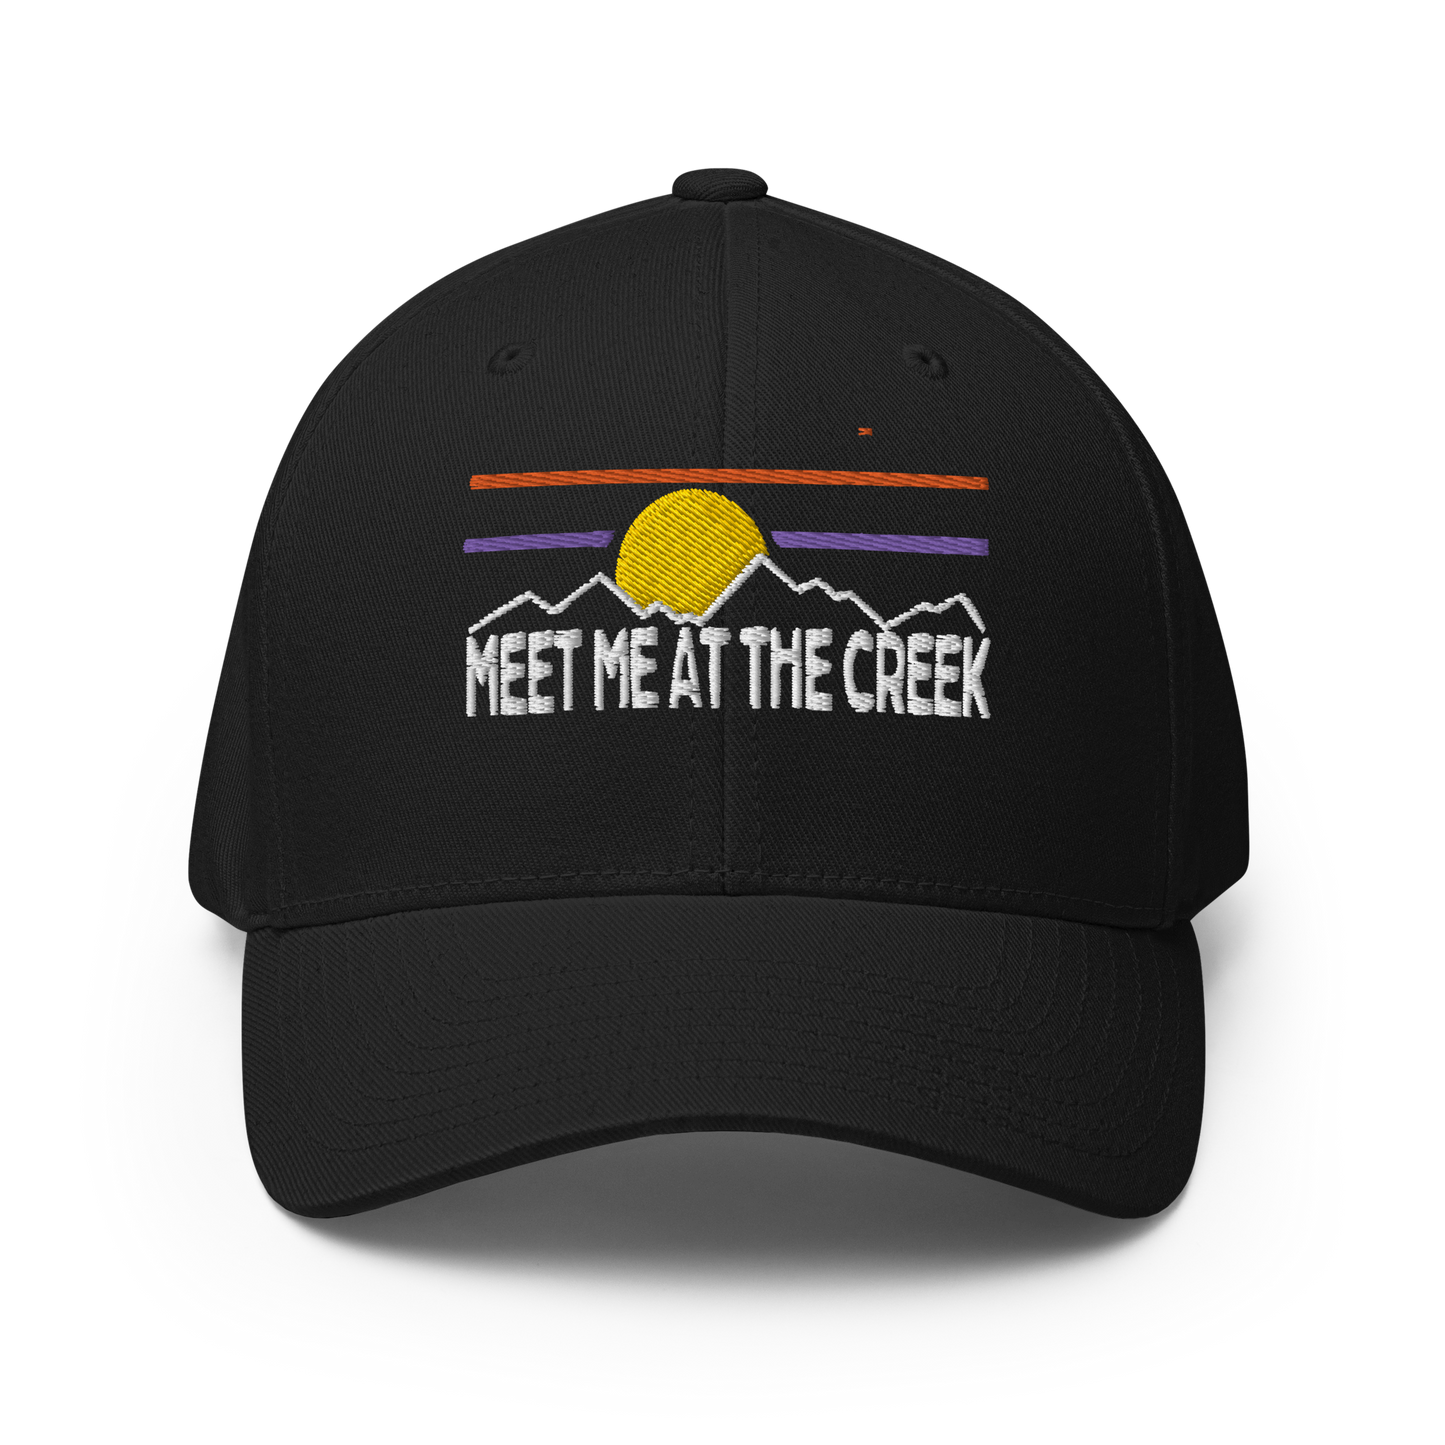 Meet Me At The Creek FlexFit Structured Twill Cap | BMFS 33 Inspired Cap